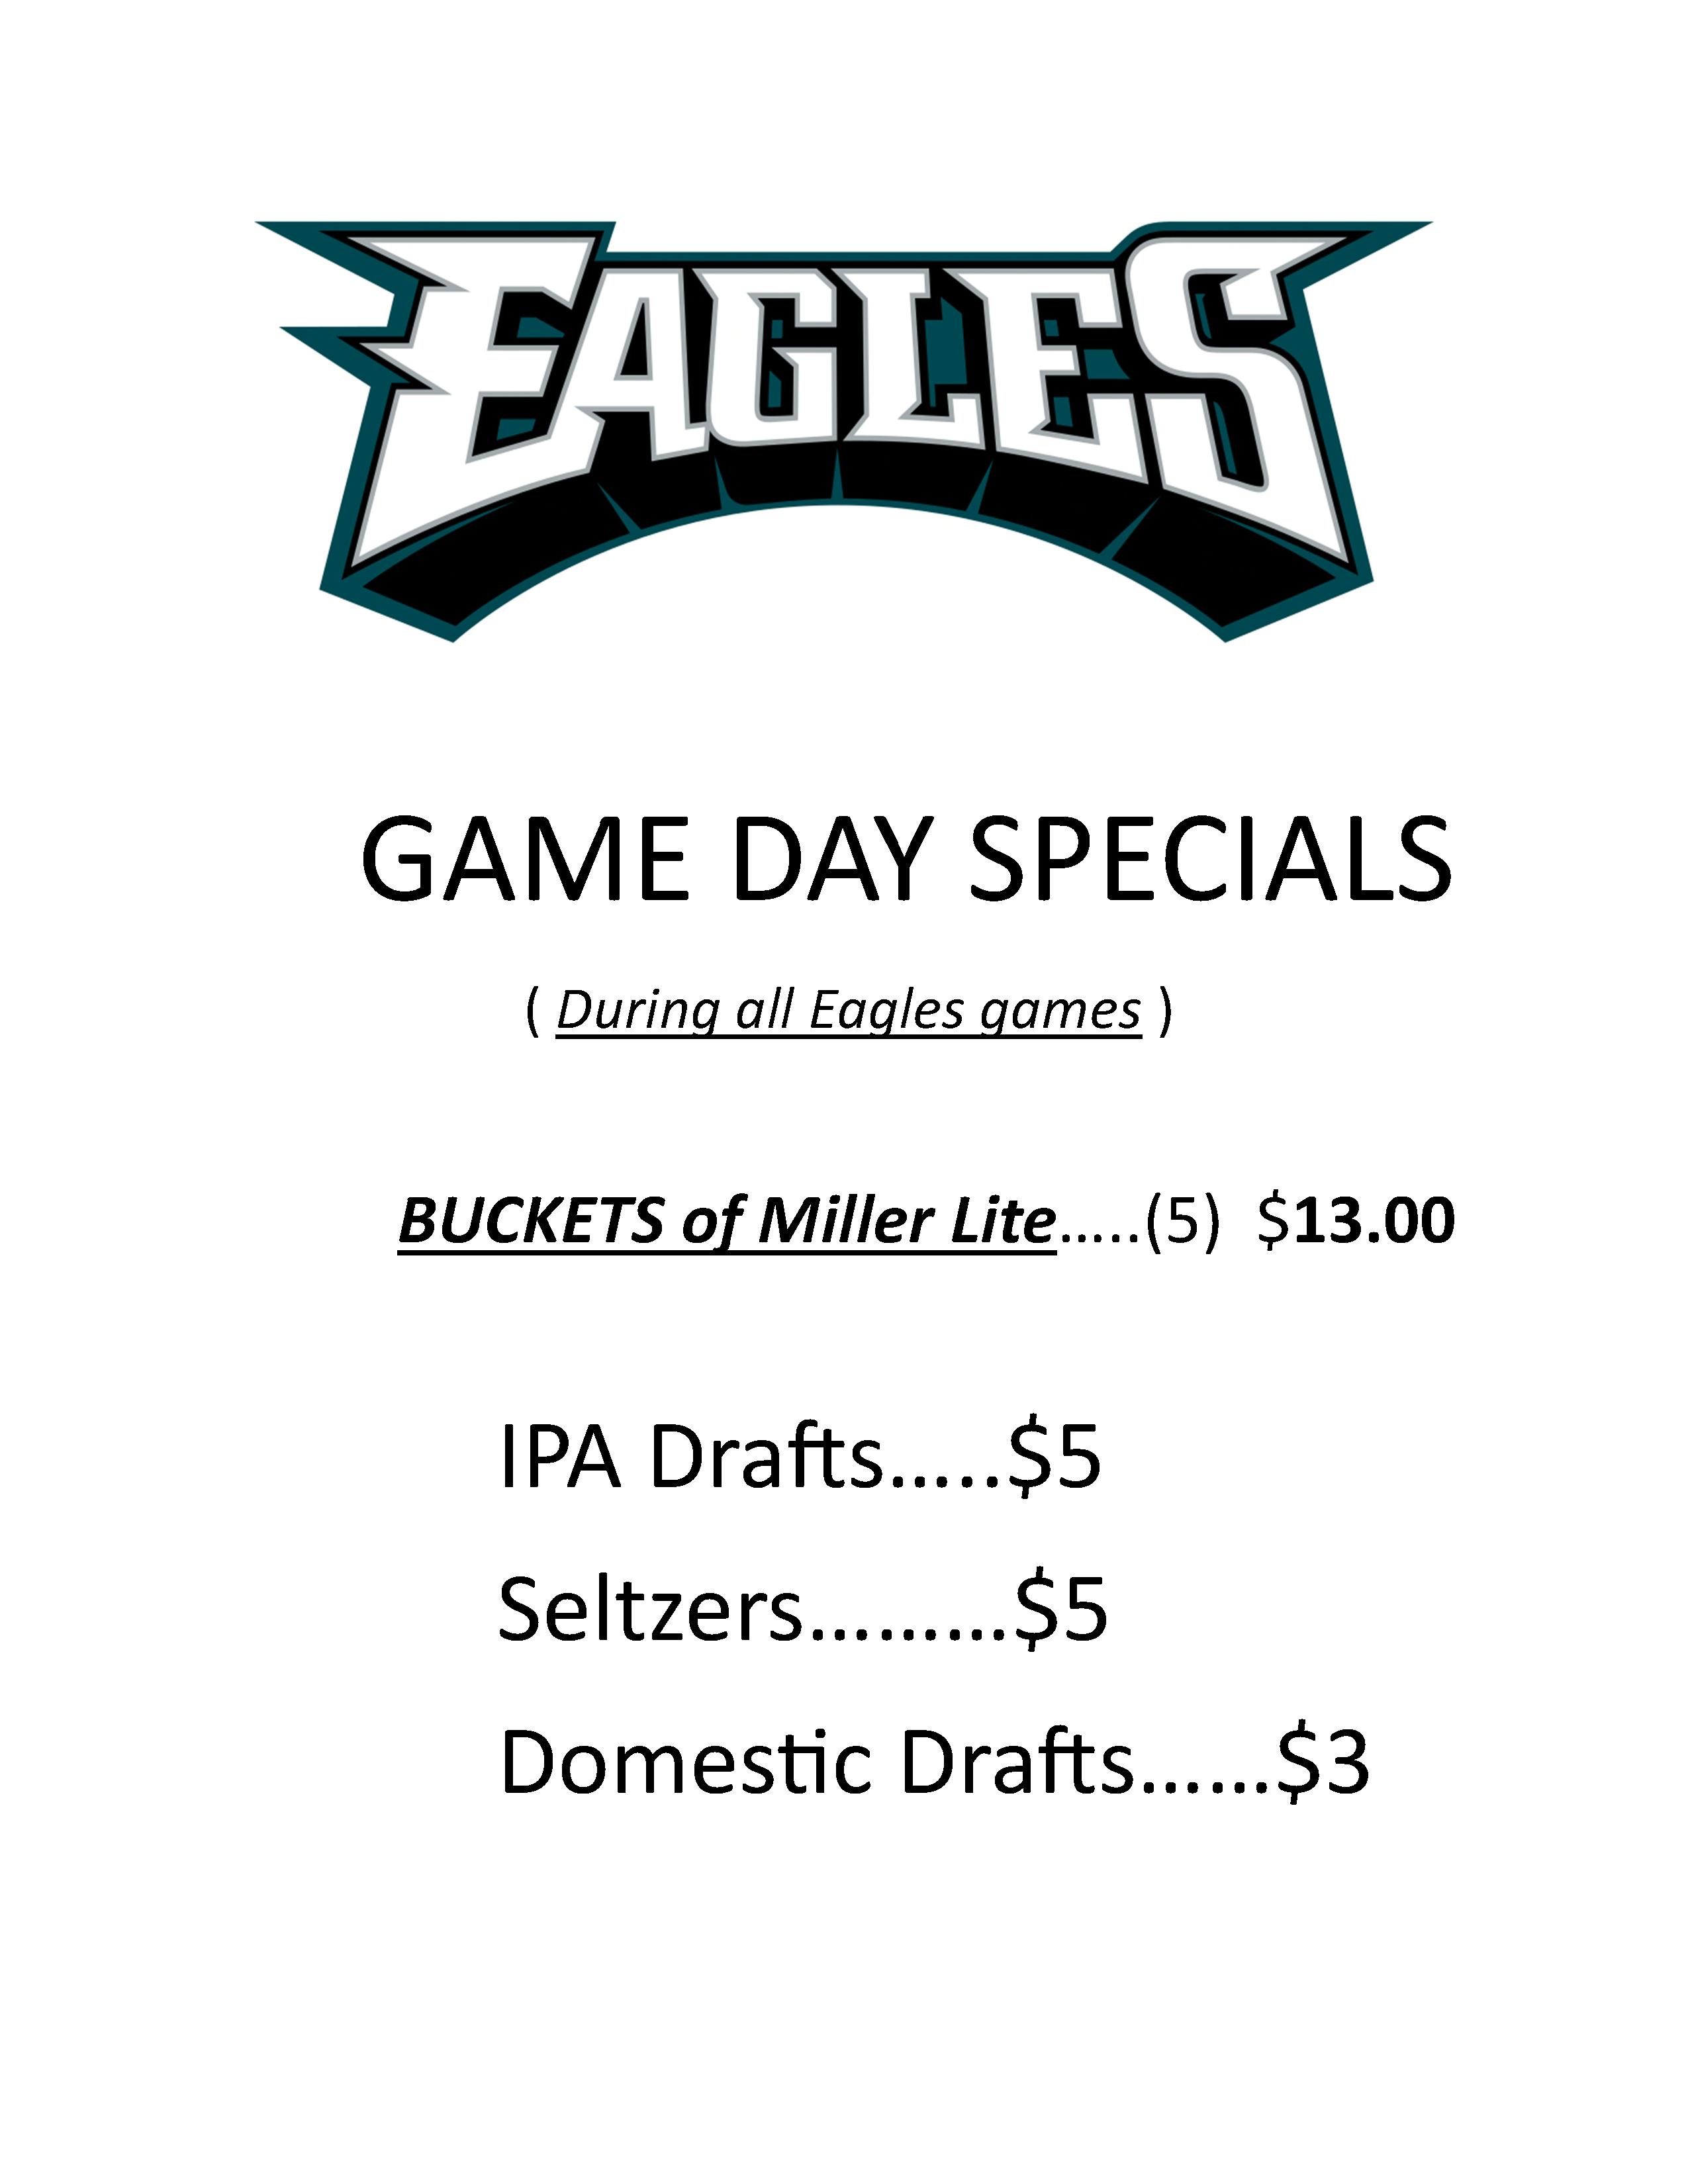 EAGLES Game Day Specials